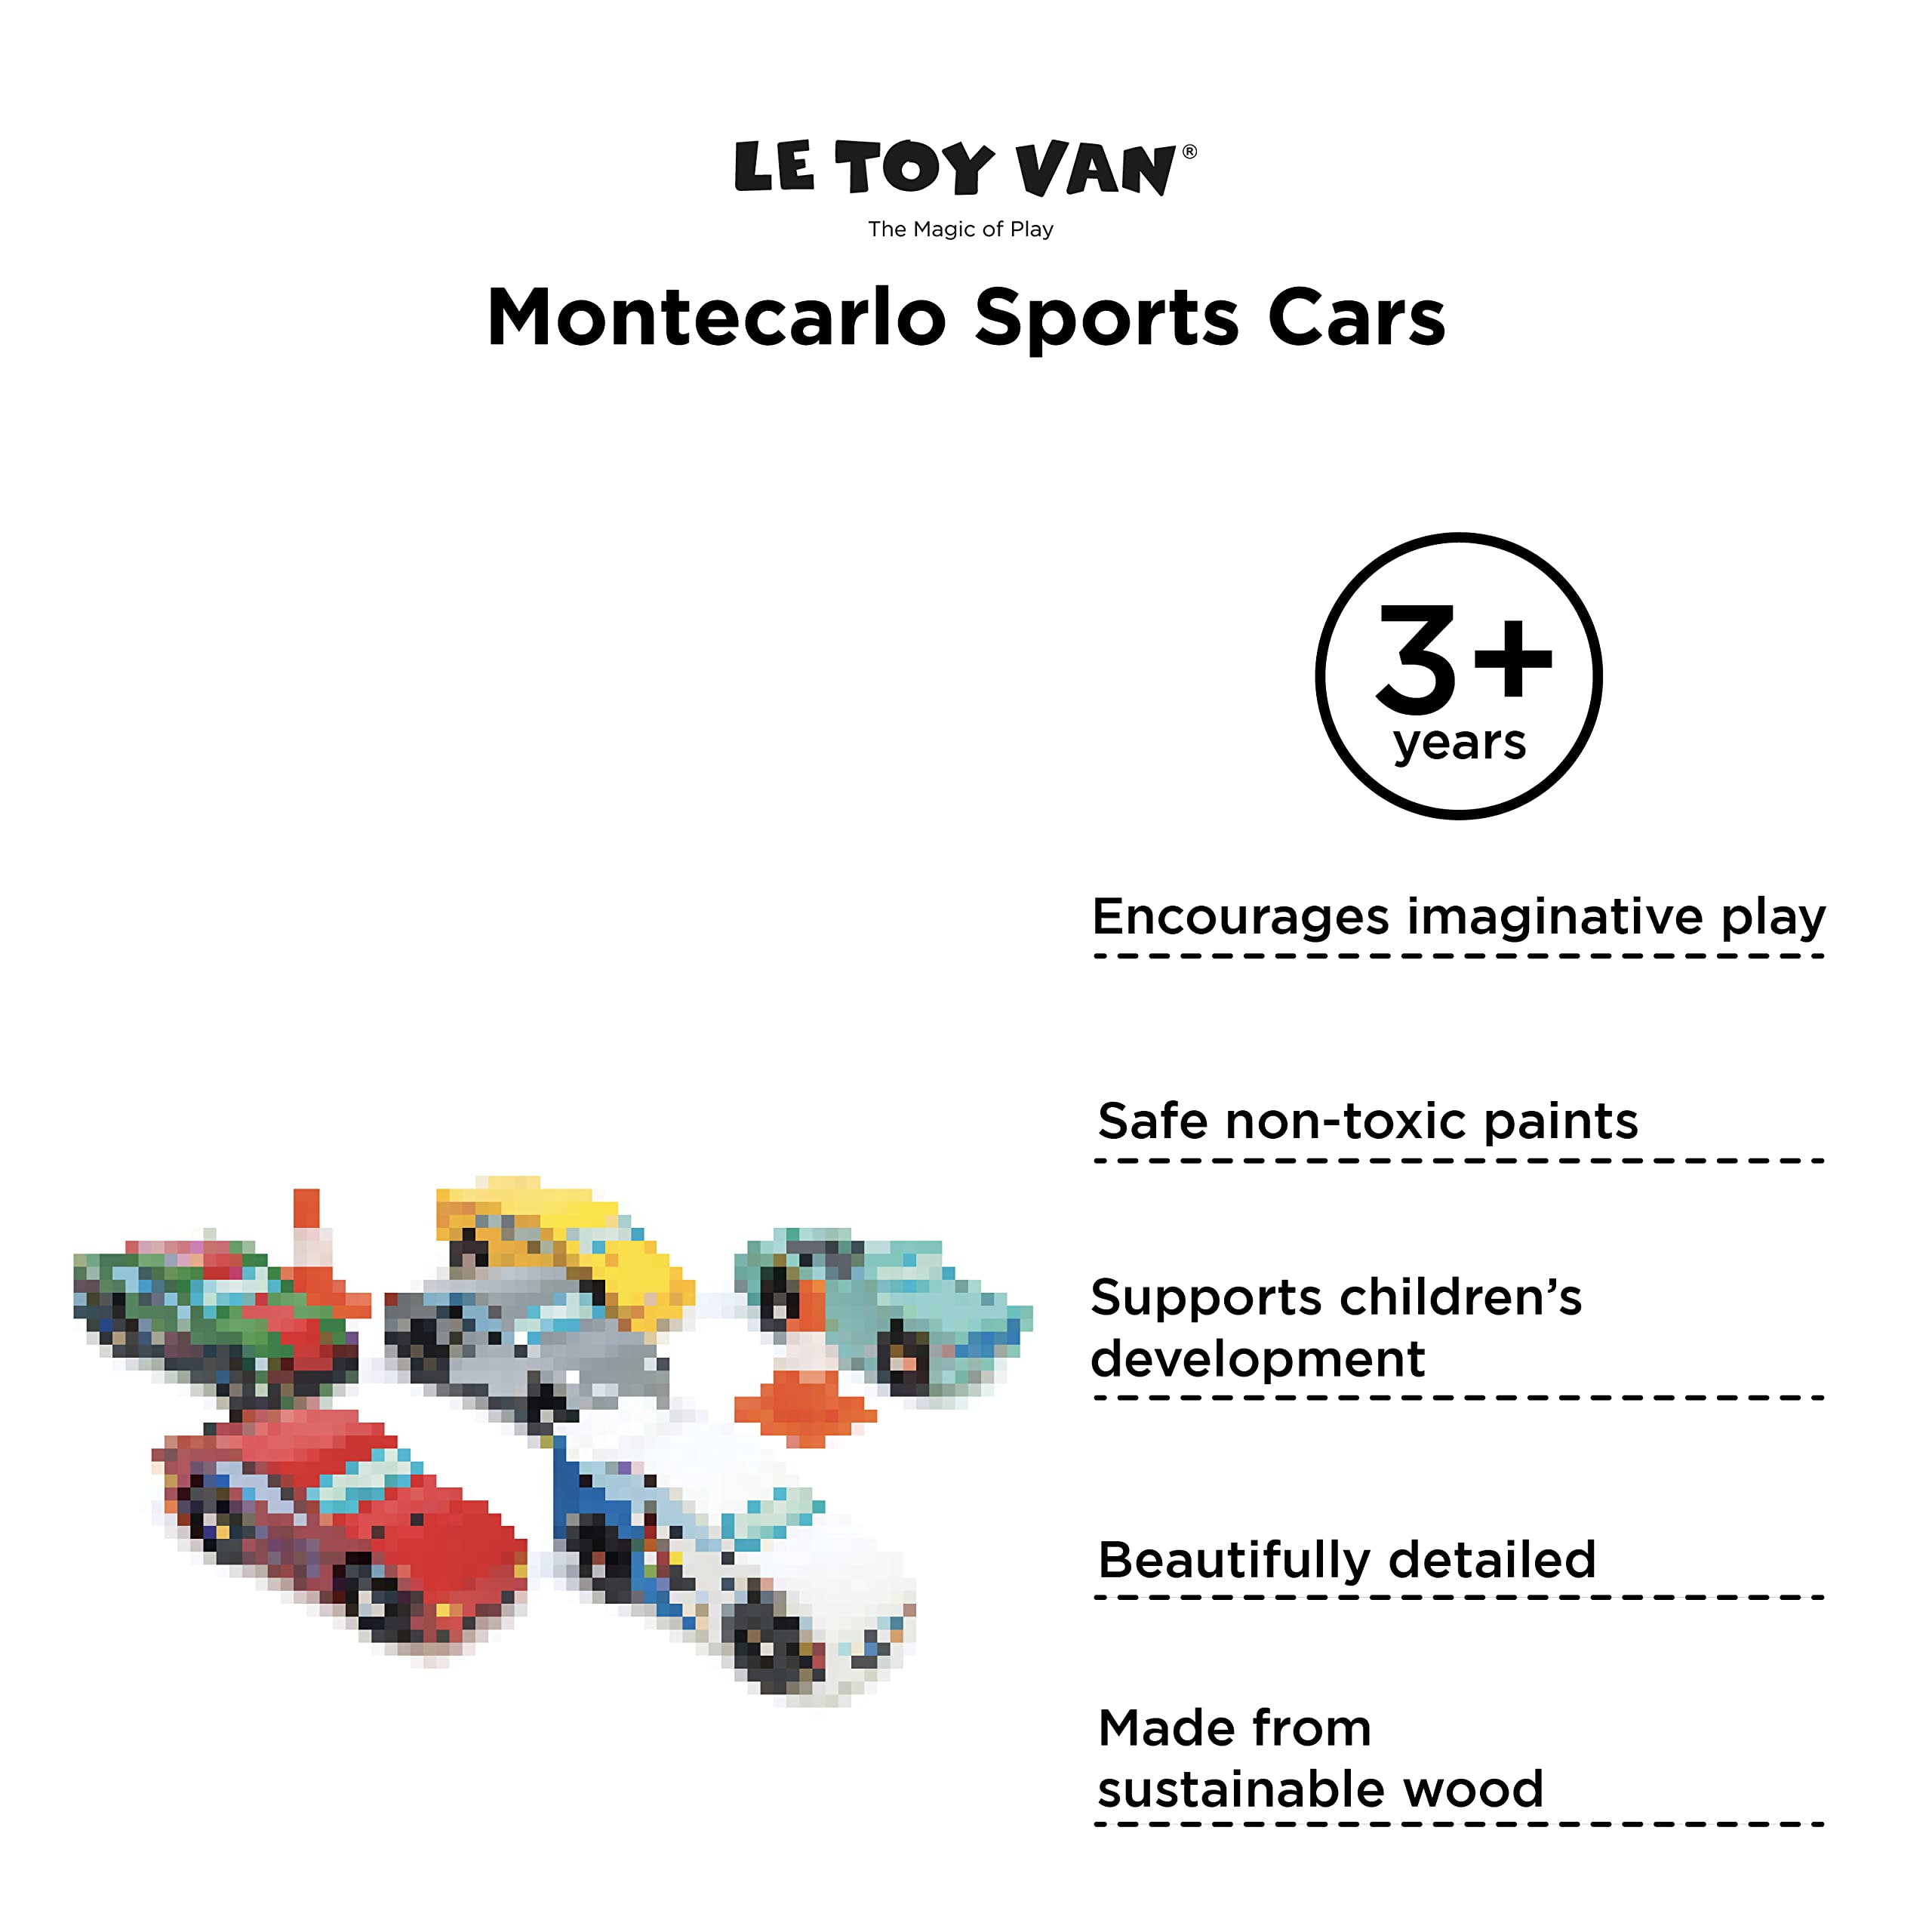 Le Toy Van Motors, Planes & Garages, Montecarlo Sports Cars Premium Wooden Toys for Kids Ages 3 Years & Up